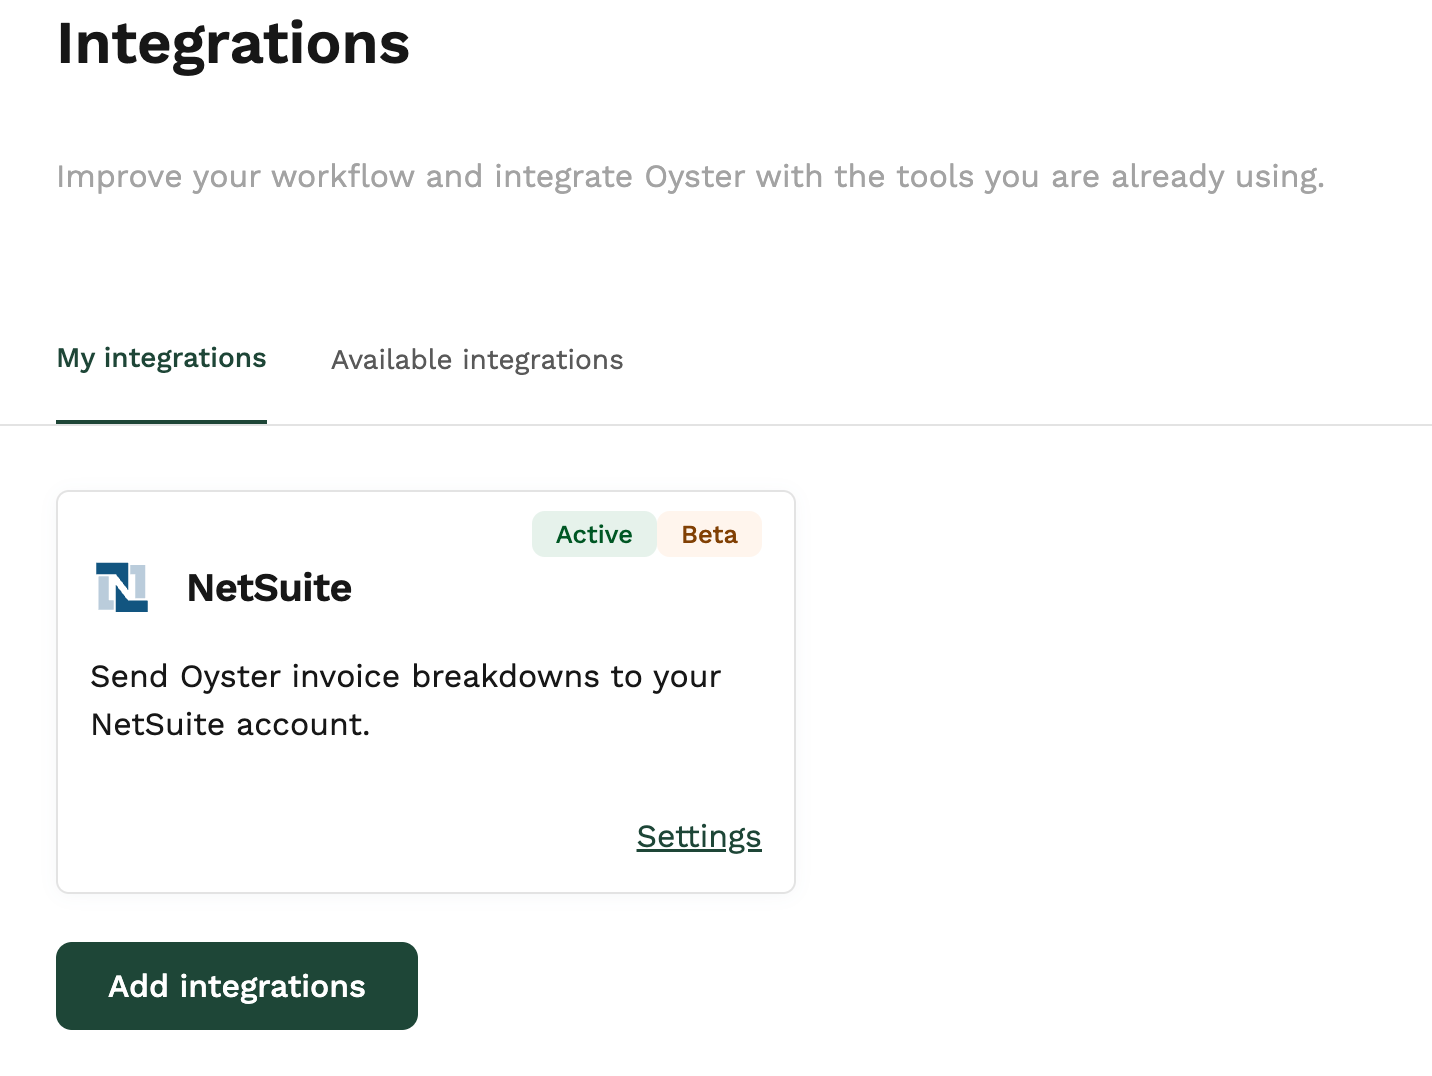 Netsuite_integration_enabled.png